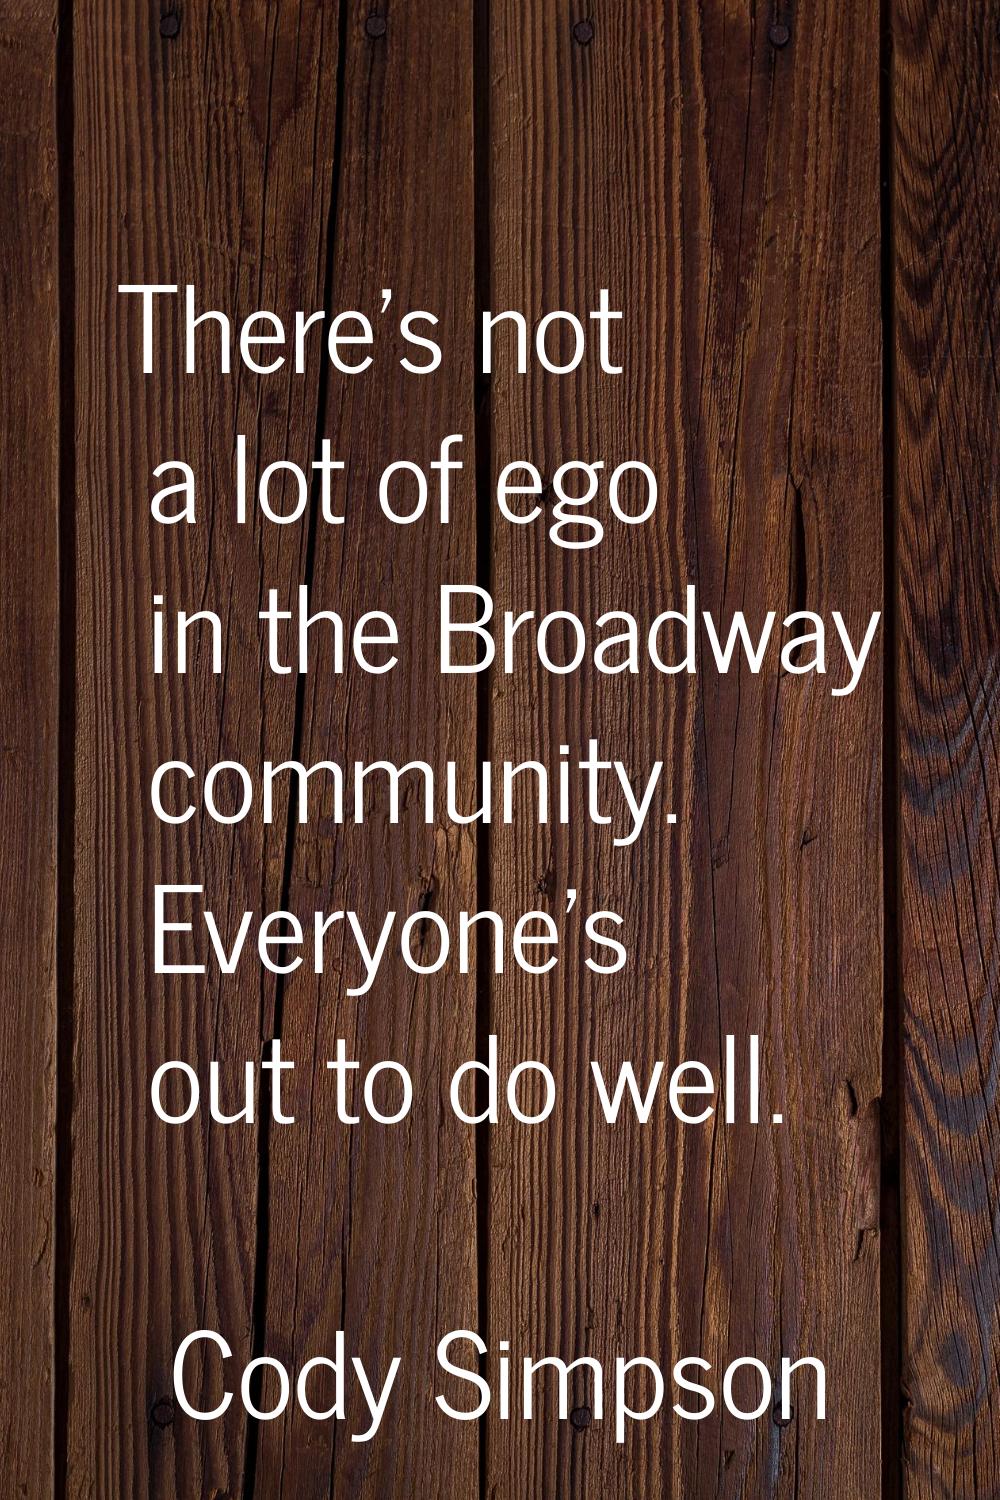 There's not a lot of ego in the Broadway community. Everyone's out to do well.